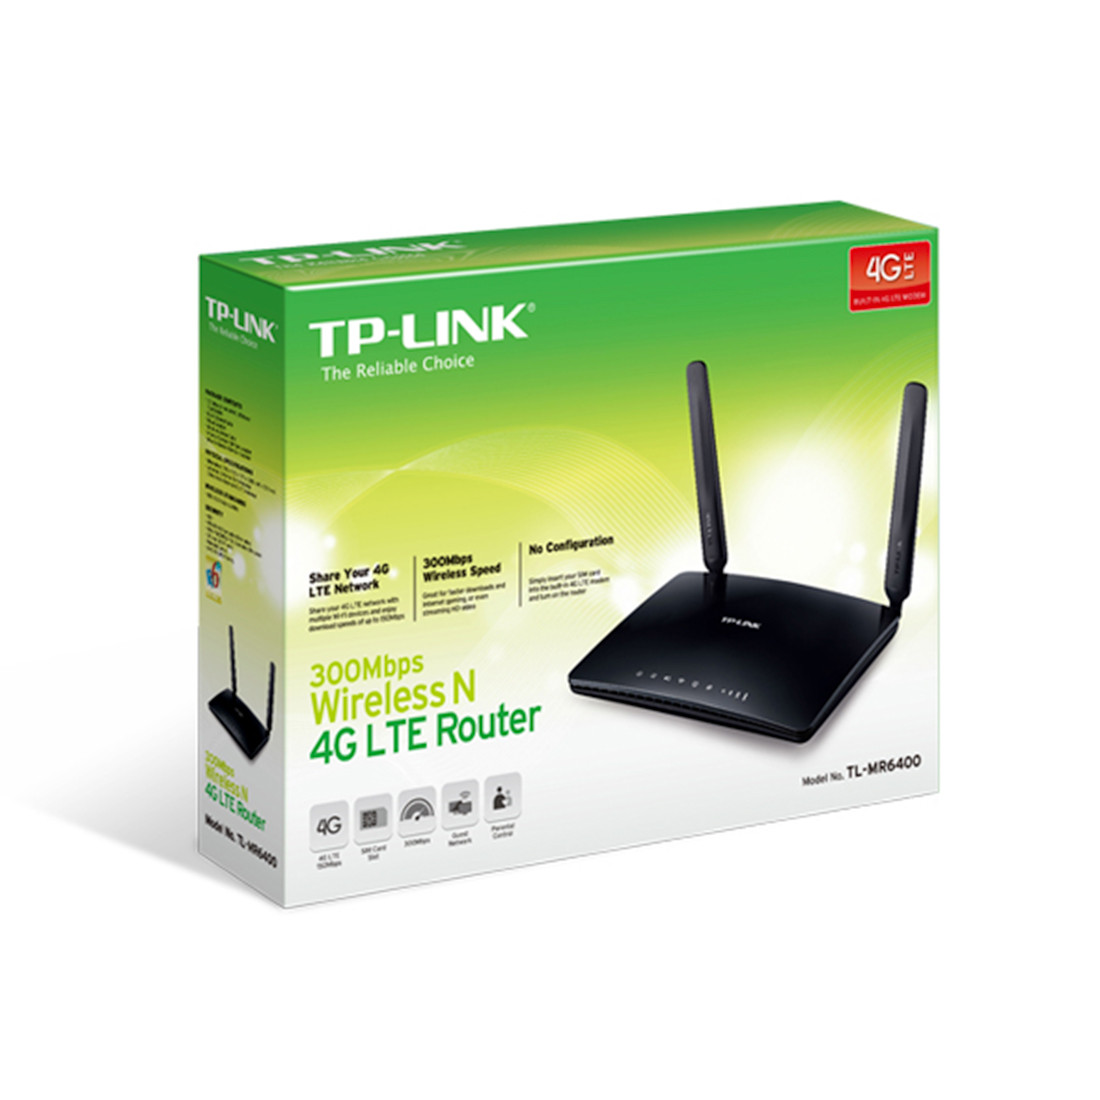 TP-LINK TL-MR6400 Маршрутизатор LTE N300 4G - фото 3 - id-p75208224